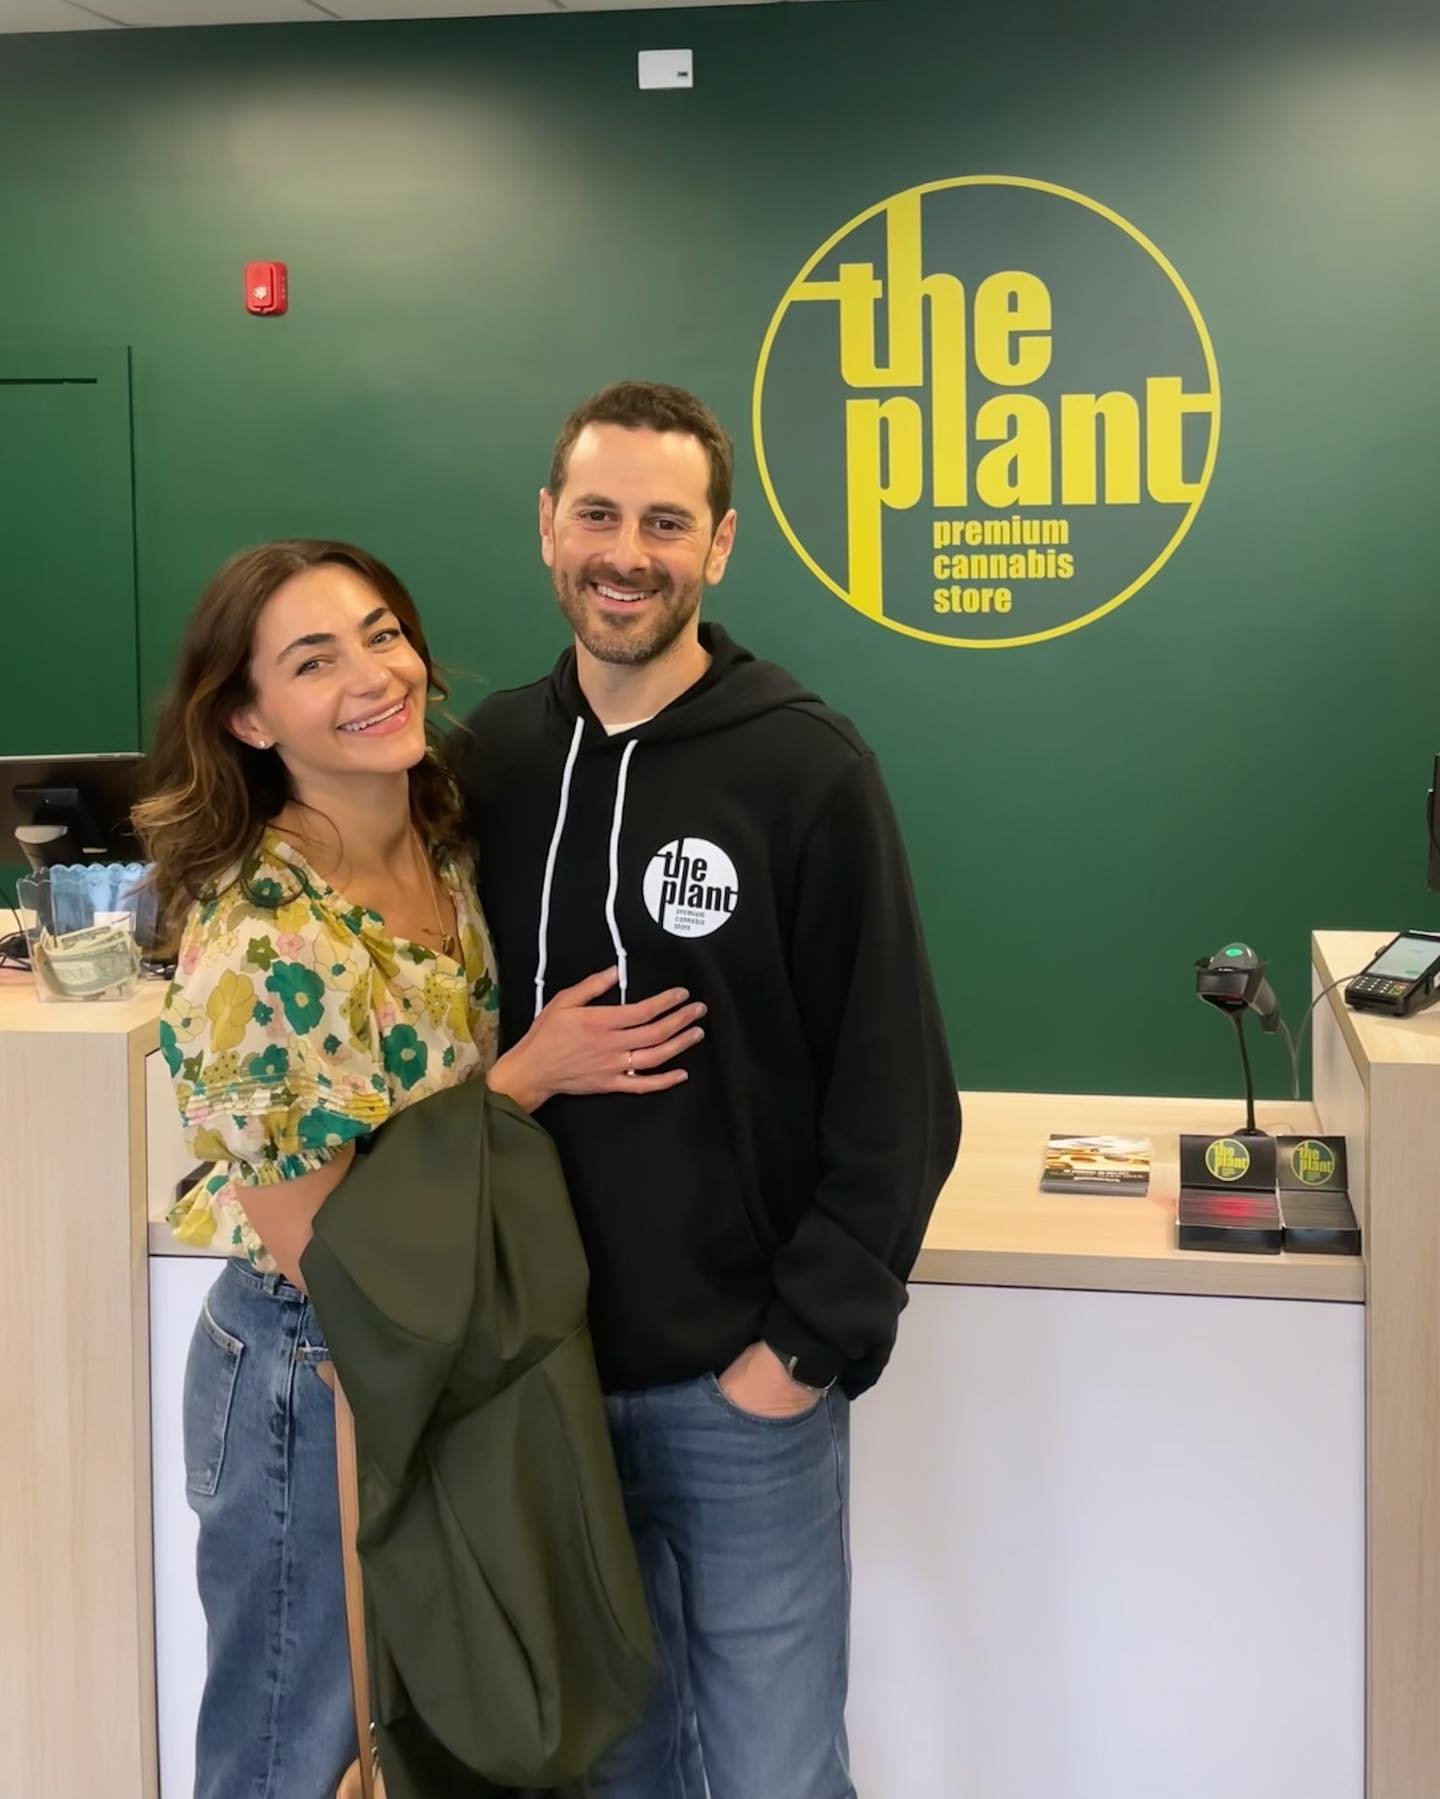 Westchester friends, your new neighborhood dispensary has arrived. Run, don&rsquo;t walk to The Plant: 2595 Central Park Ave, Scarsdale NY 🌱 Congrats to the best team 🥰